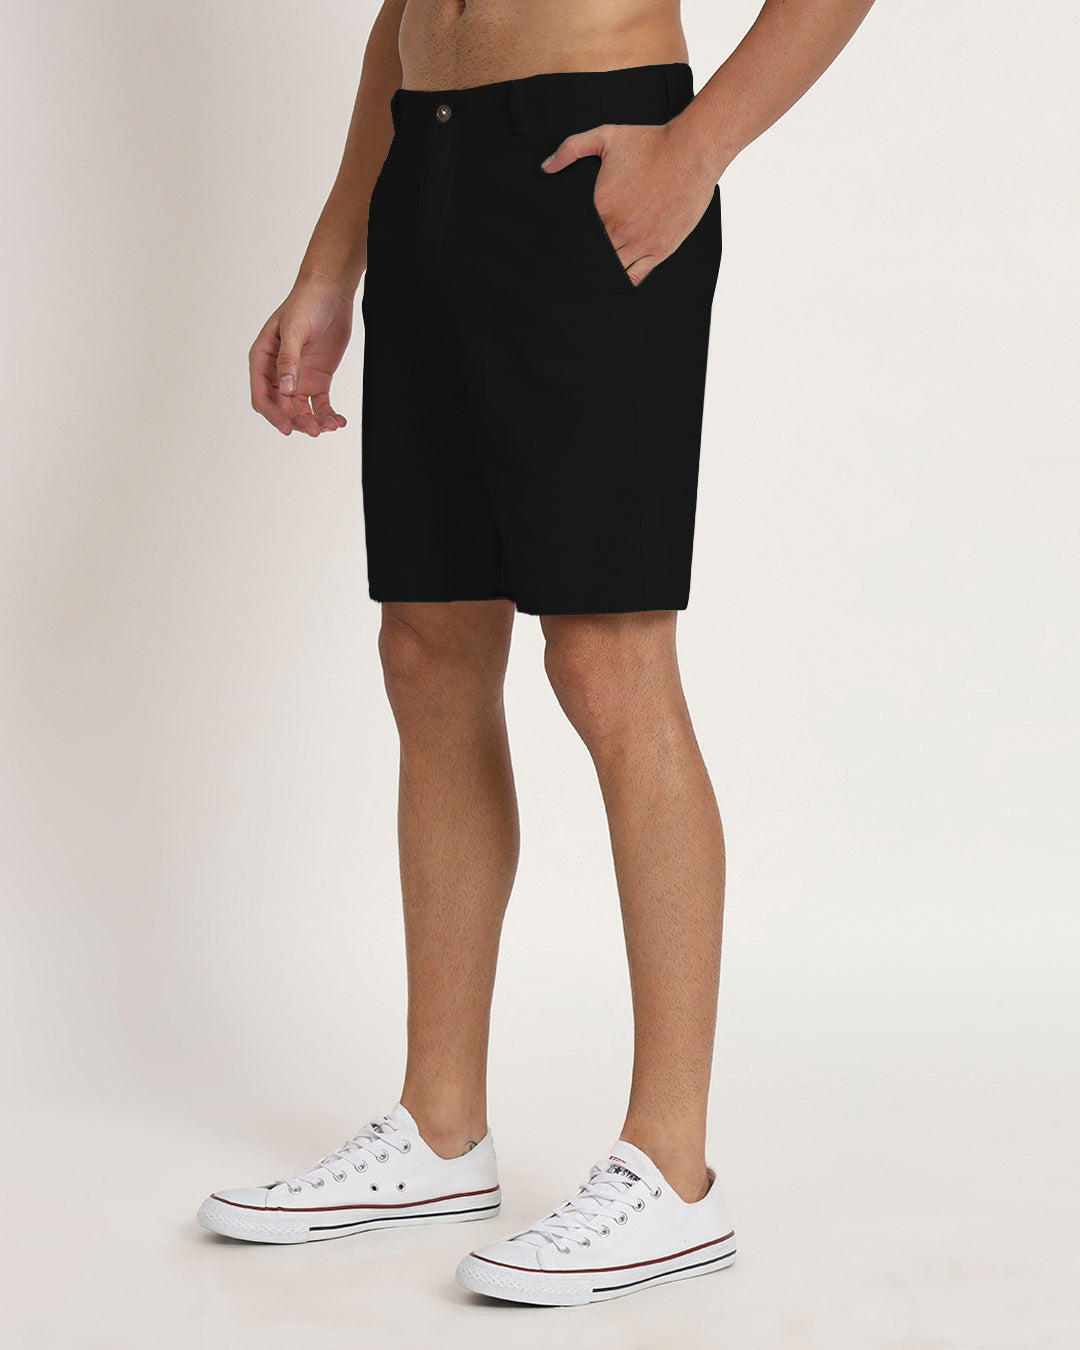 Combo : Ready For Anything Black & Fondant Pink Men's Shorts